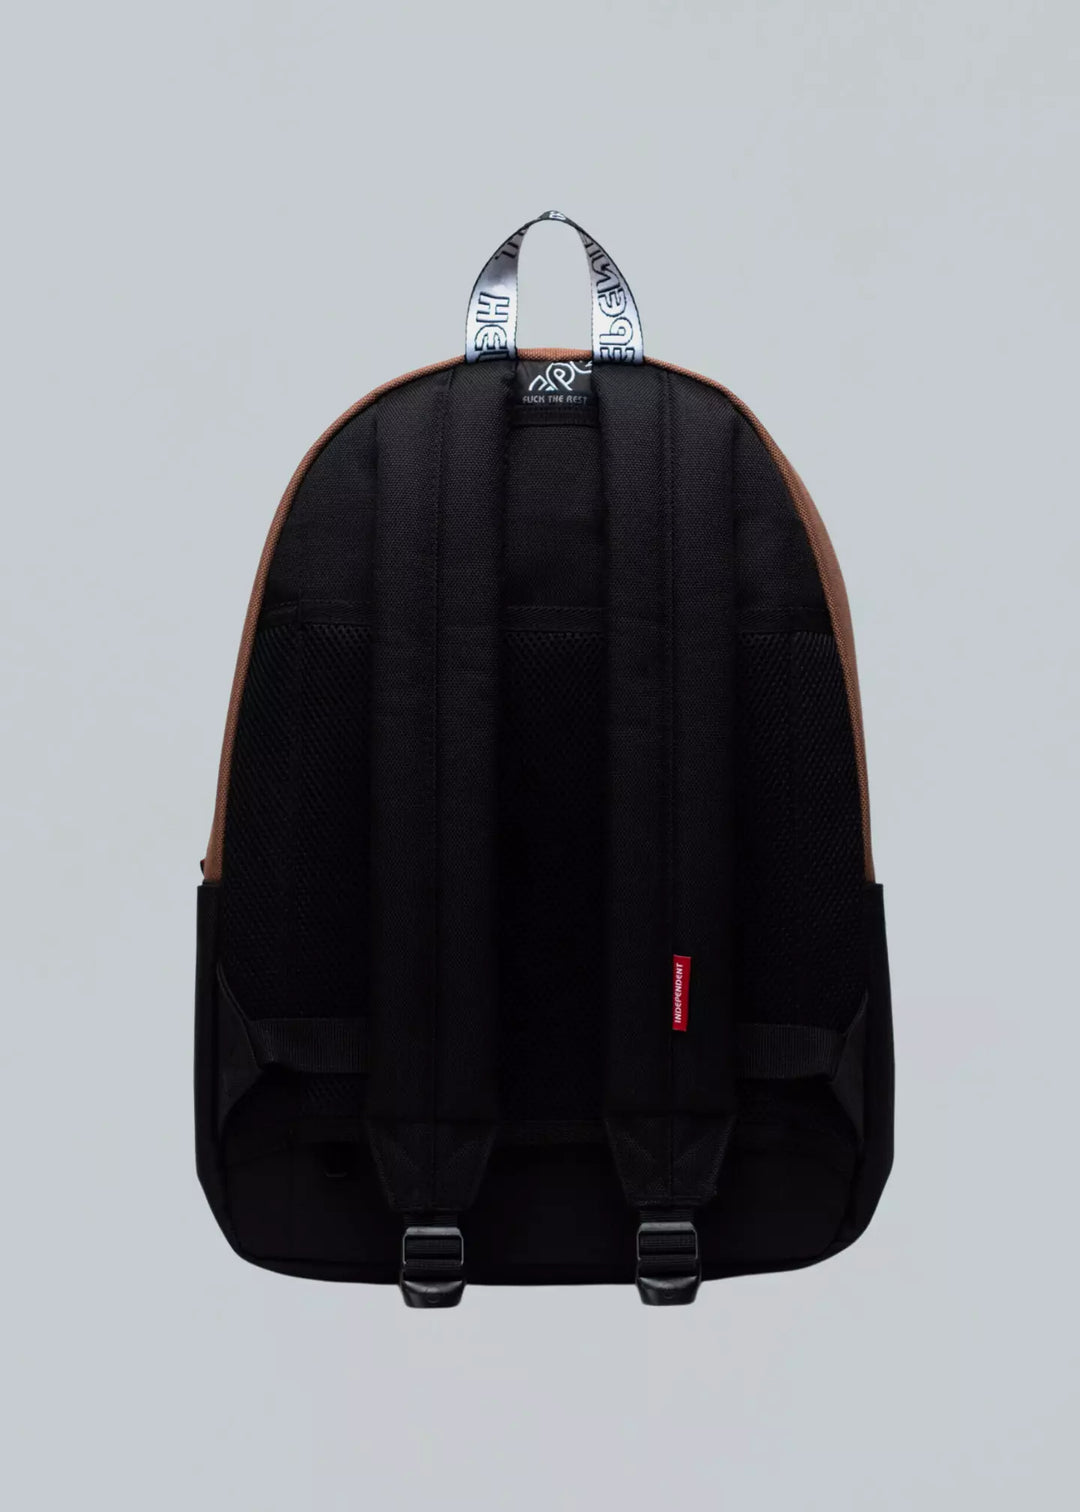 Independent Classic XL Backpack Brown